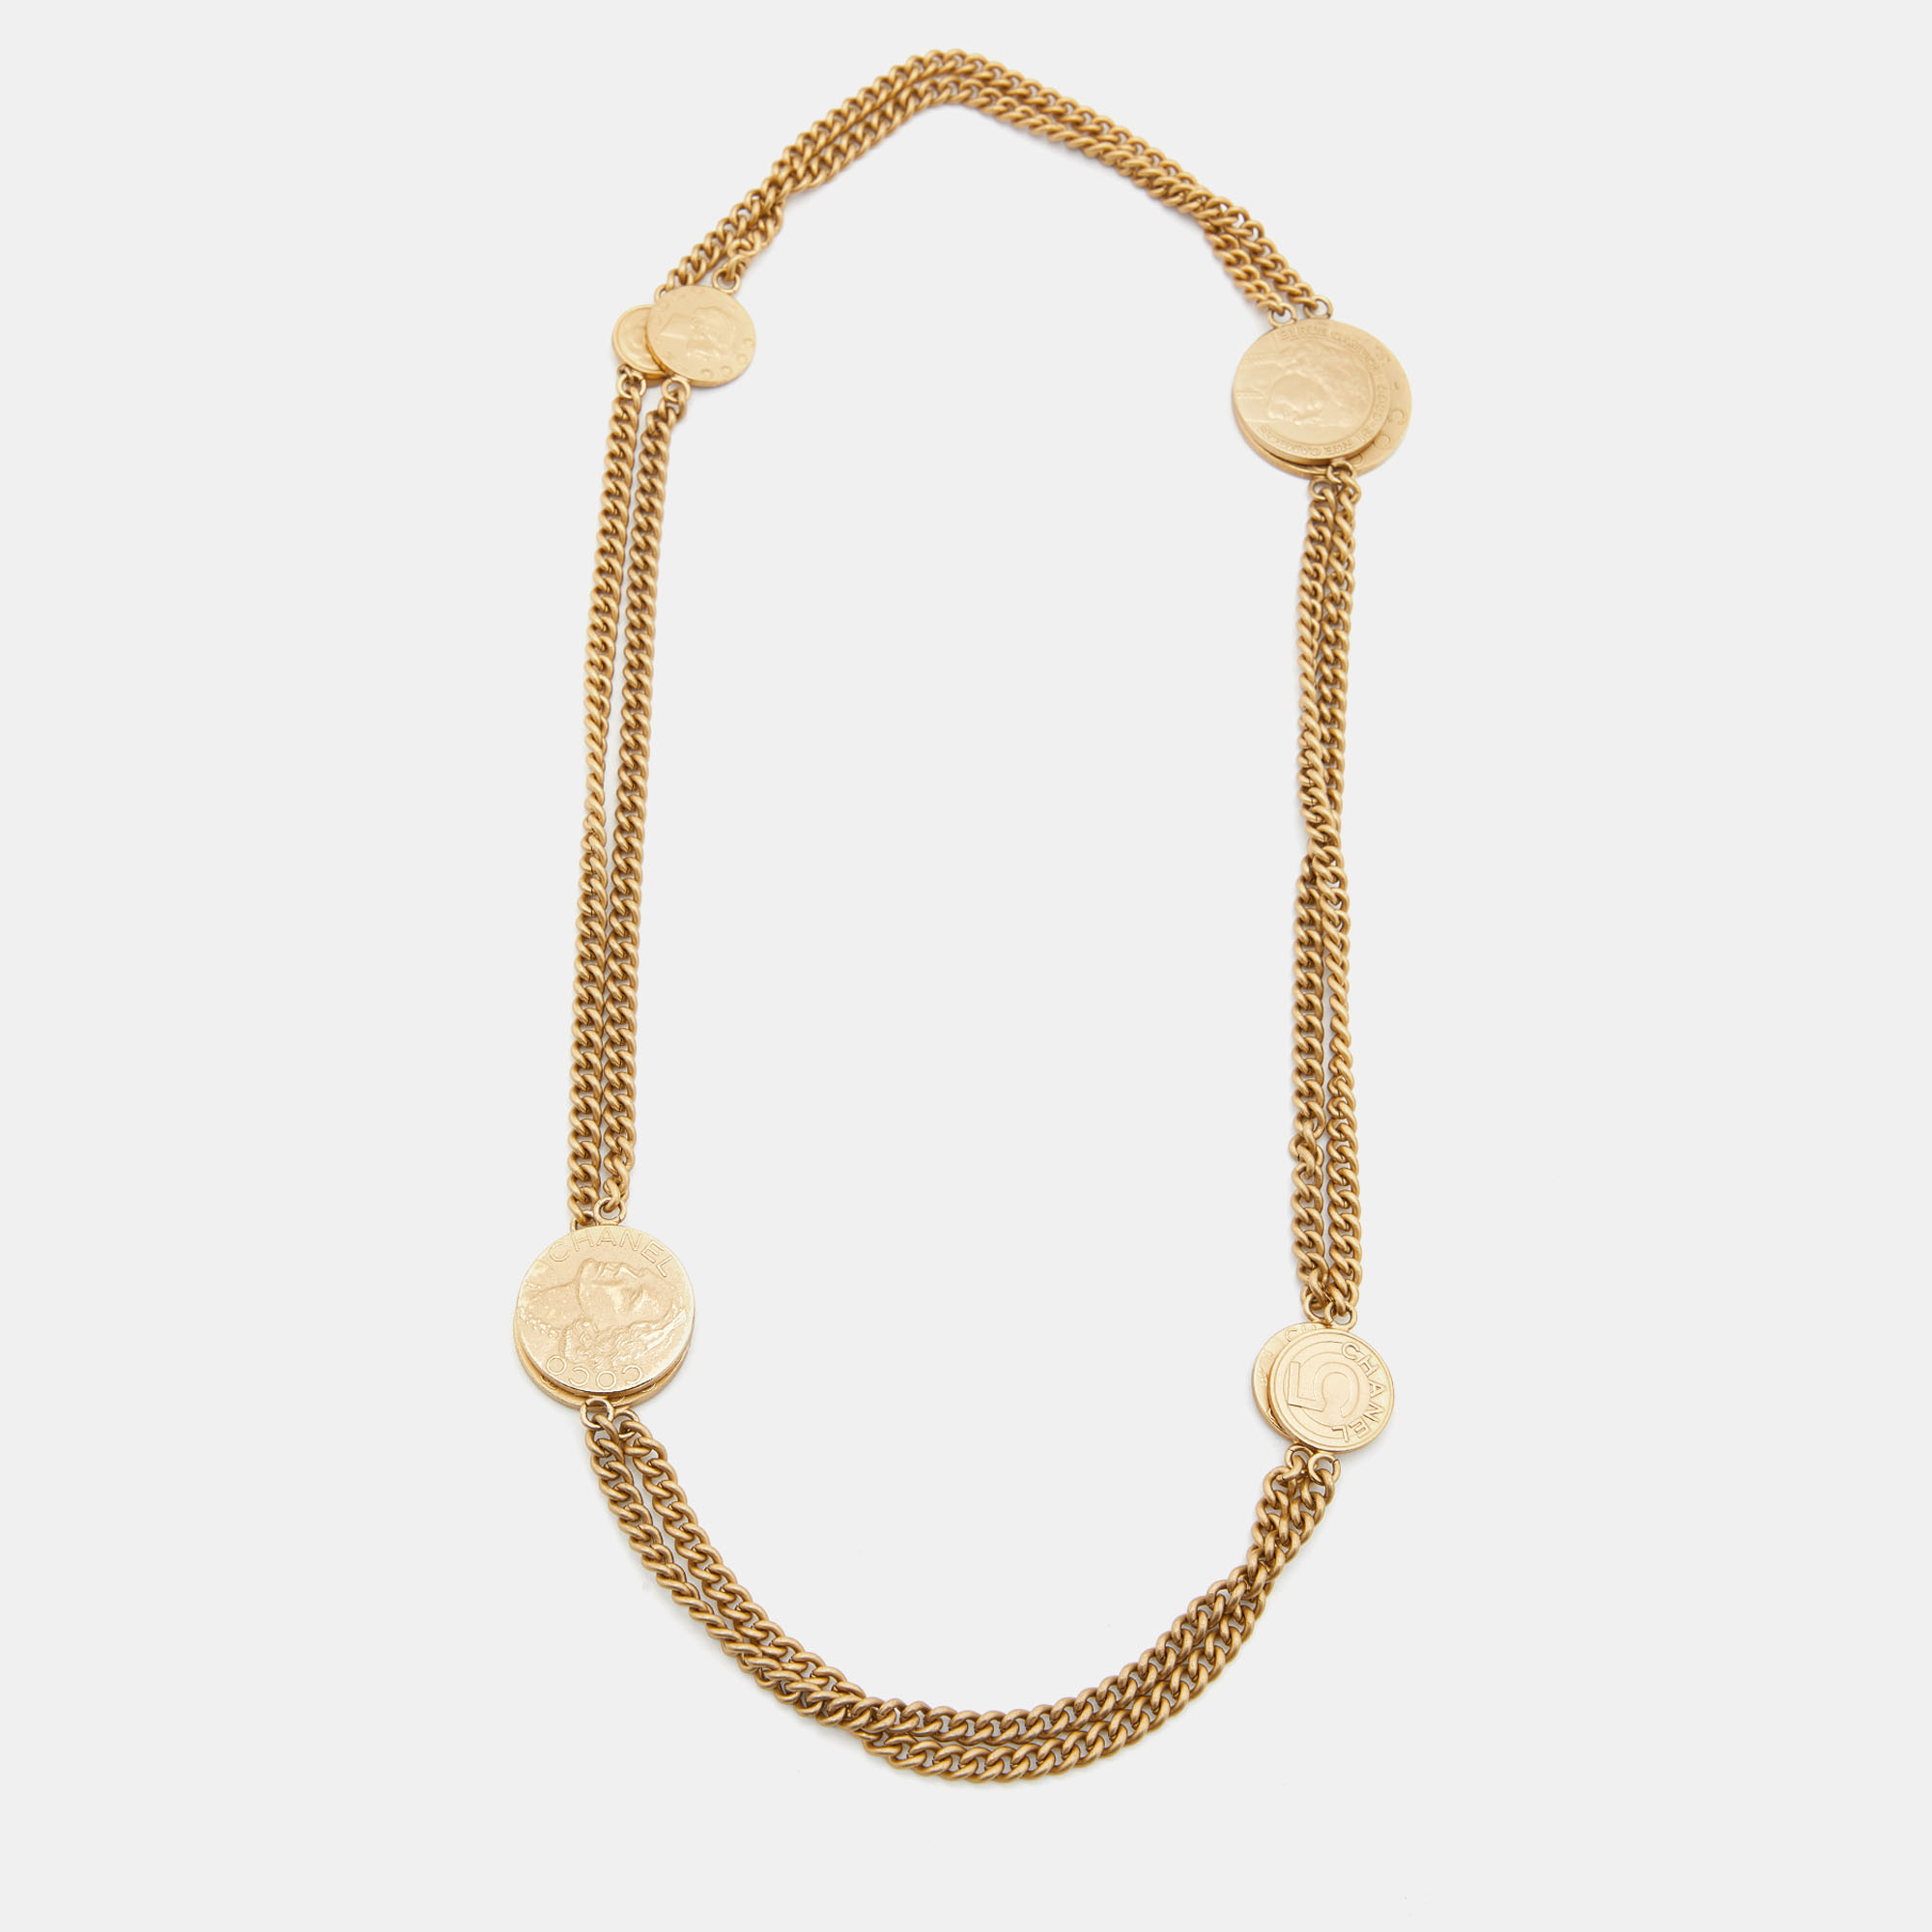 Chanel Gold Tone CC Coin Chain Long Necklace